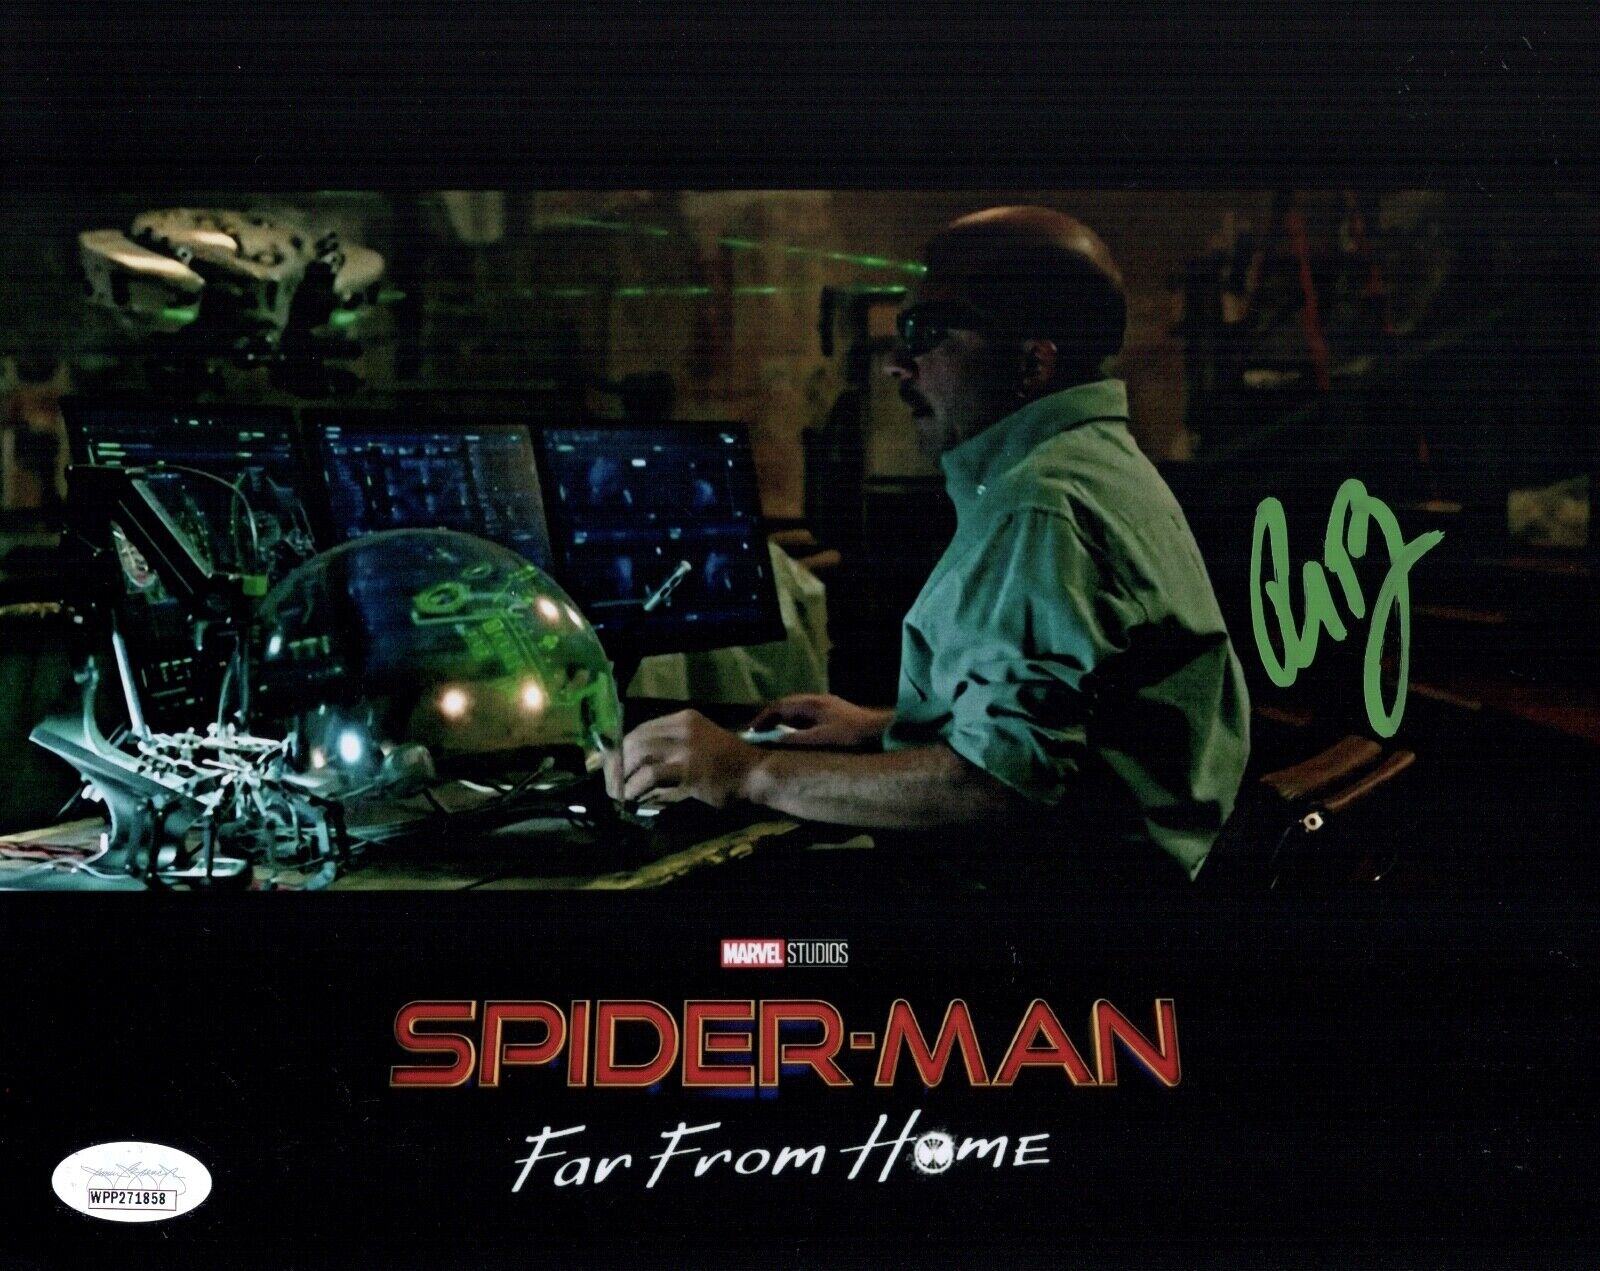 PETER BILLINGSLEY Signed 8x10 Spider Man Far From Home Photo Poster painting WITNESS JSA COA